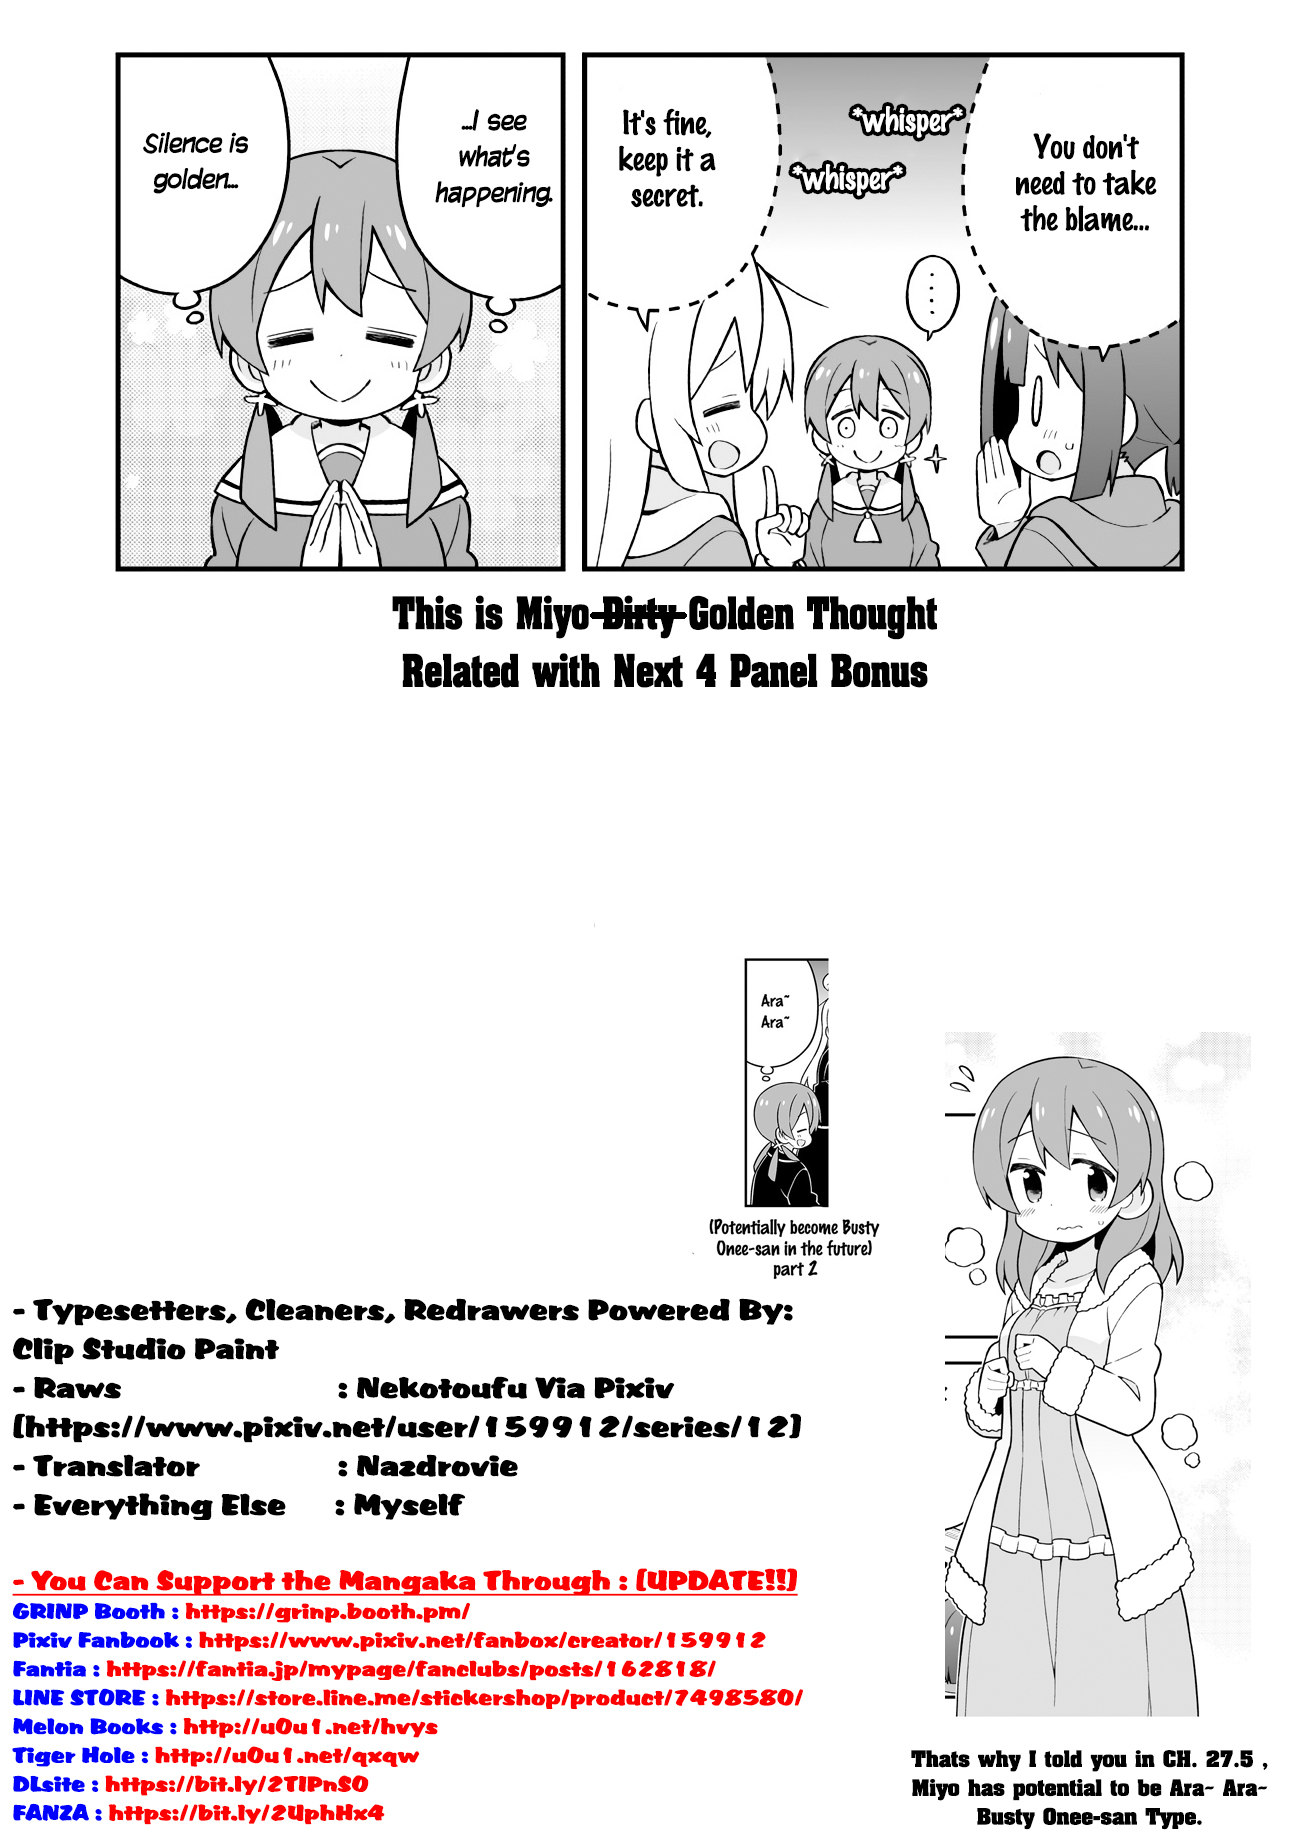 Onii chan is Done For! Vol. 3 Ch. 28 Mahiro and Girl's Night (Second Part) [Pixiv Version]